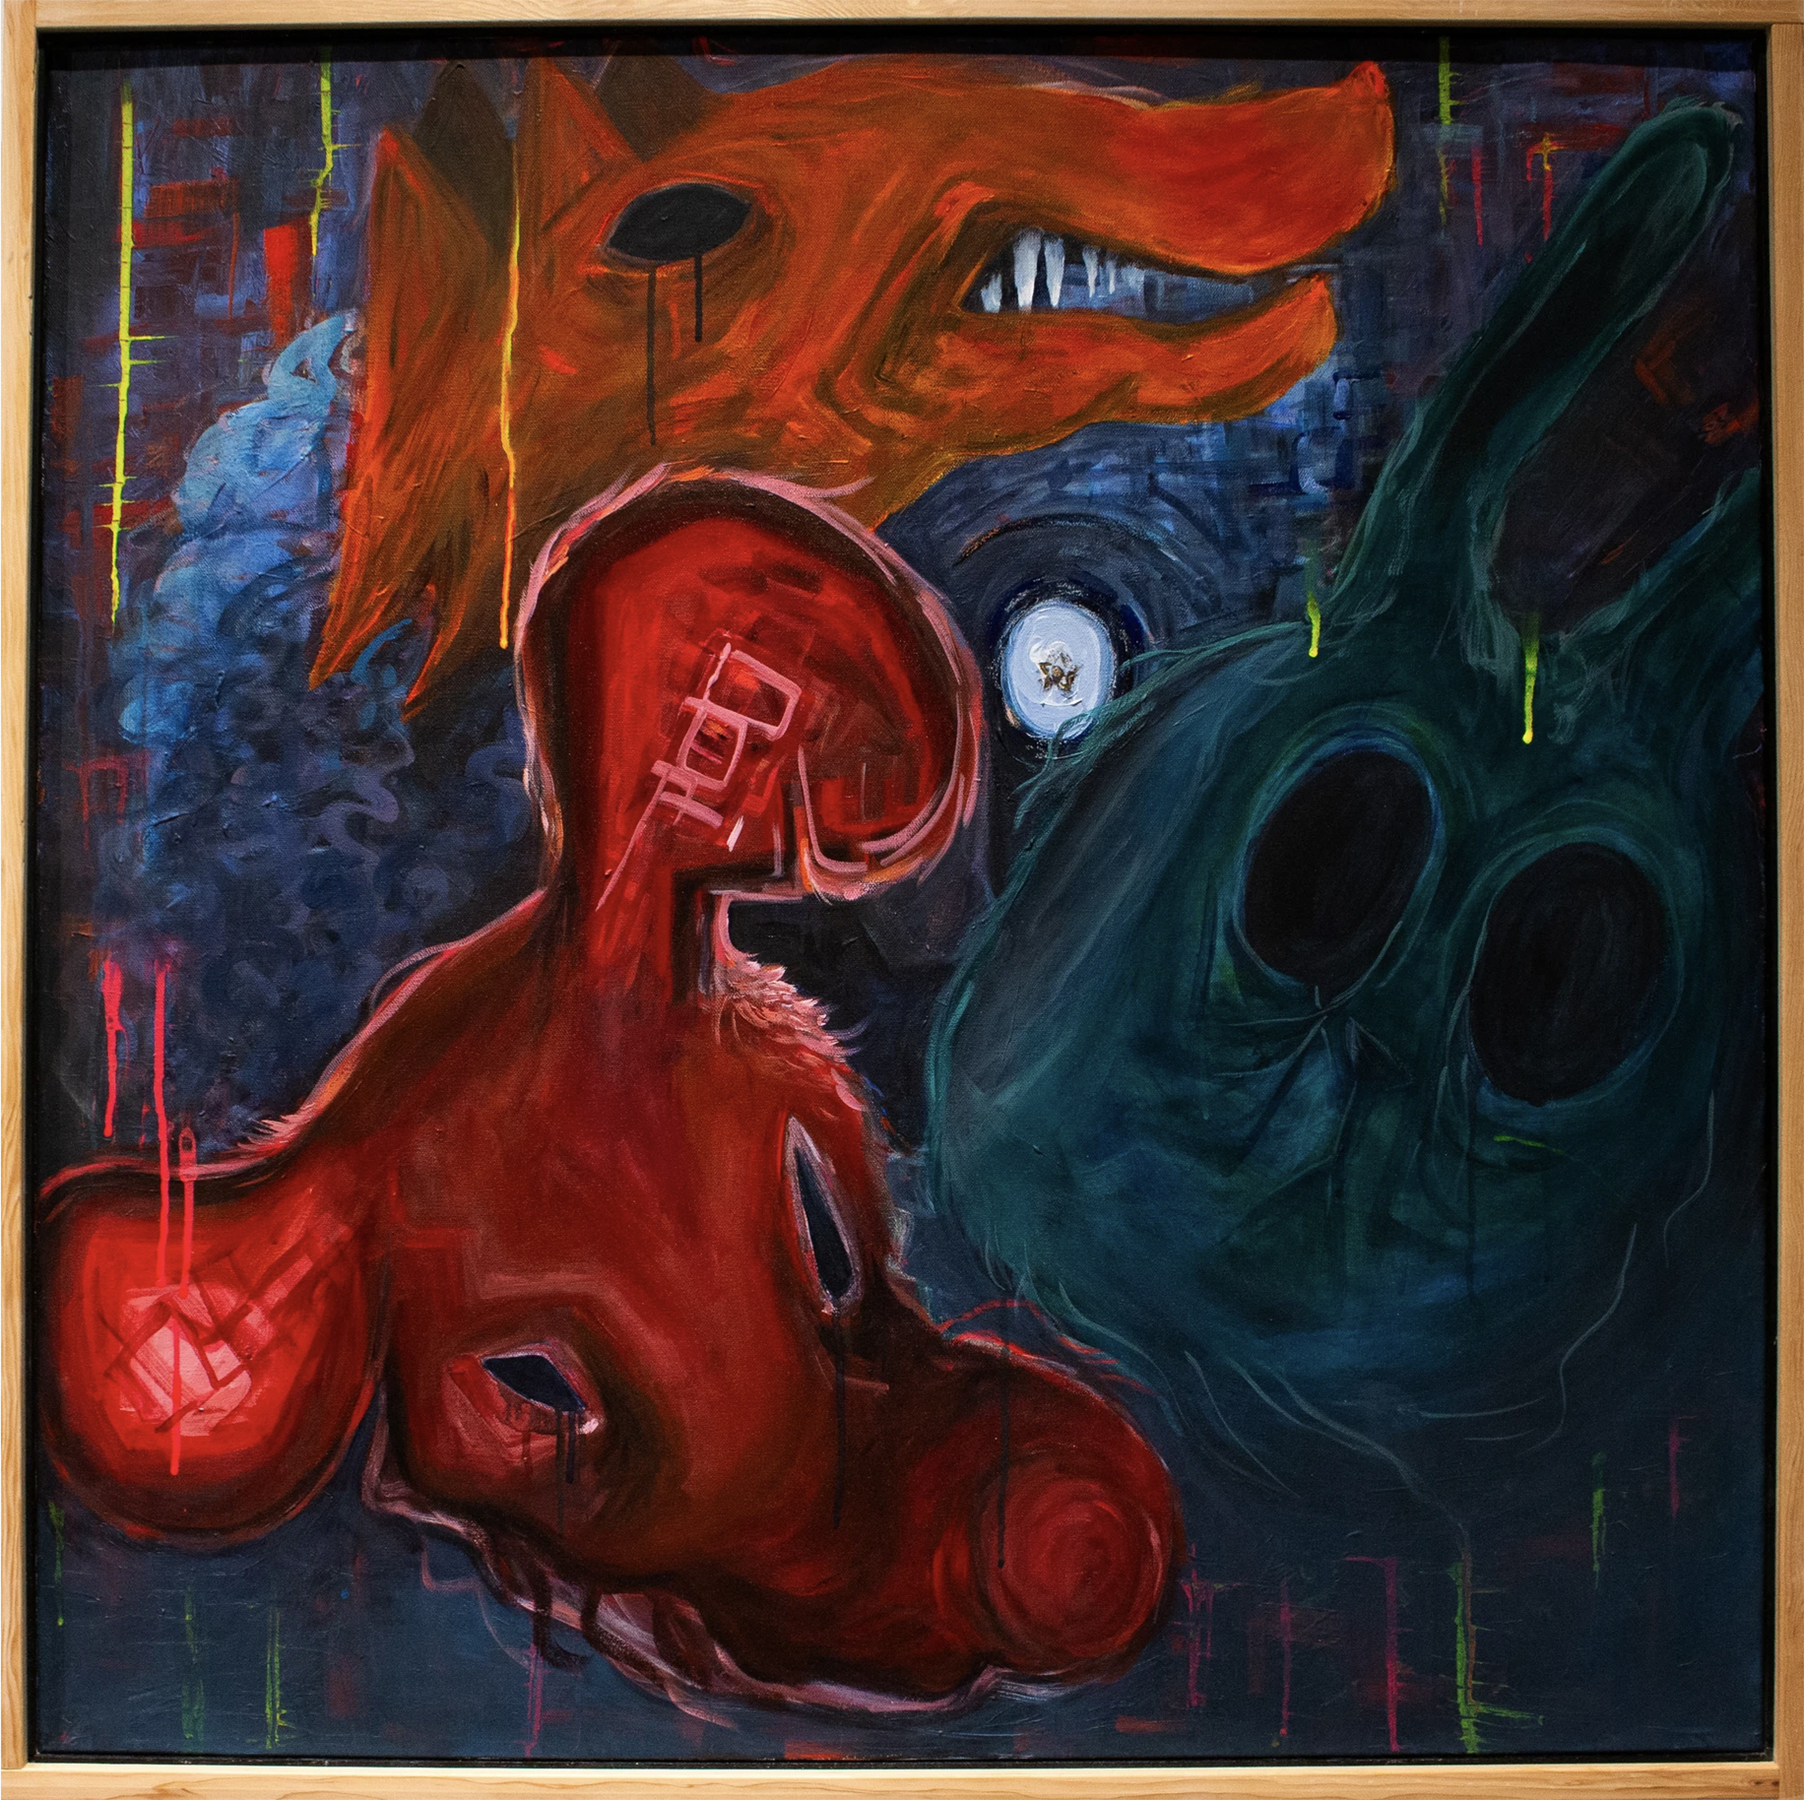 Dark, colorful abstract painting of three animal face, courtesy of the artist